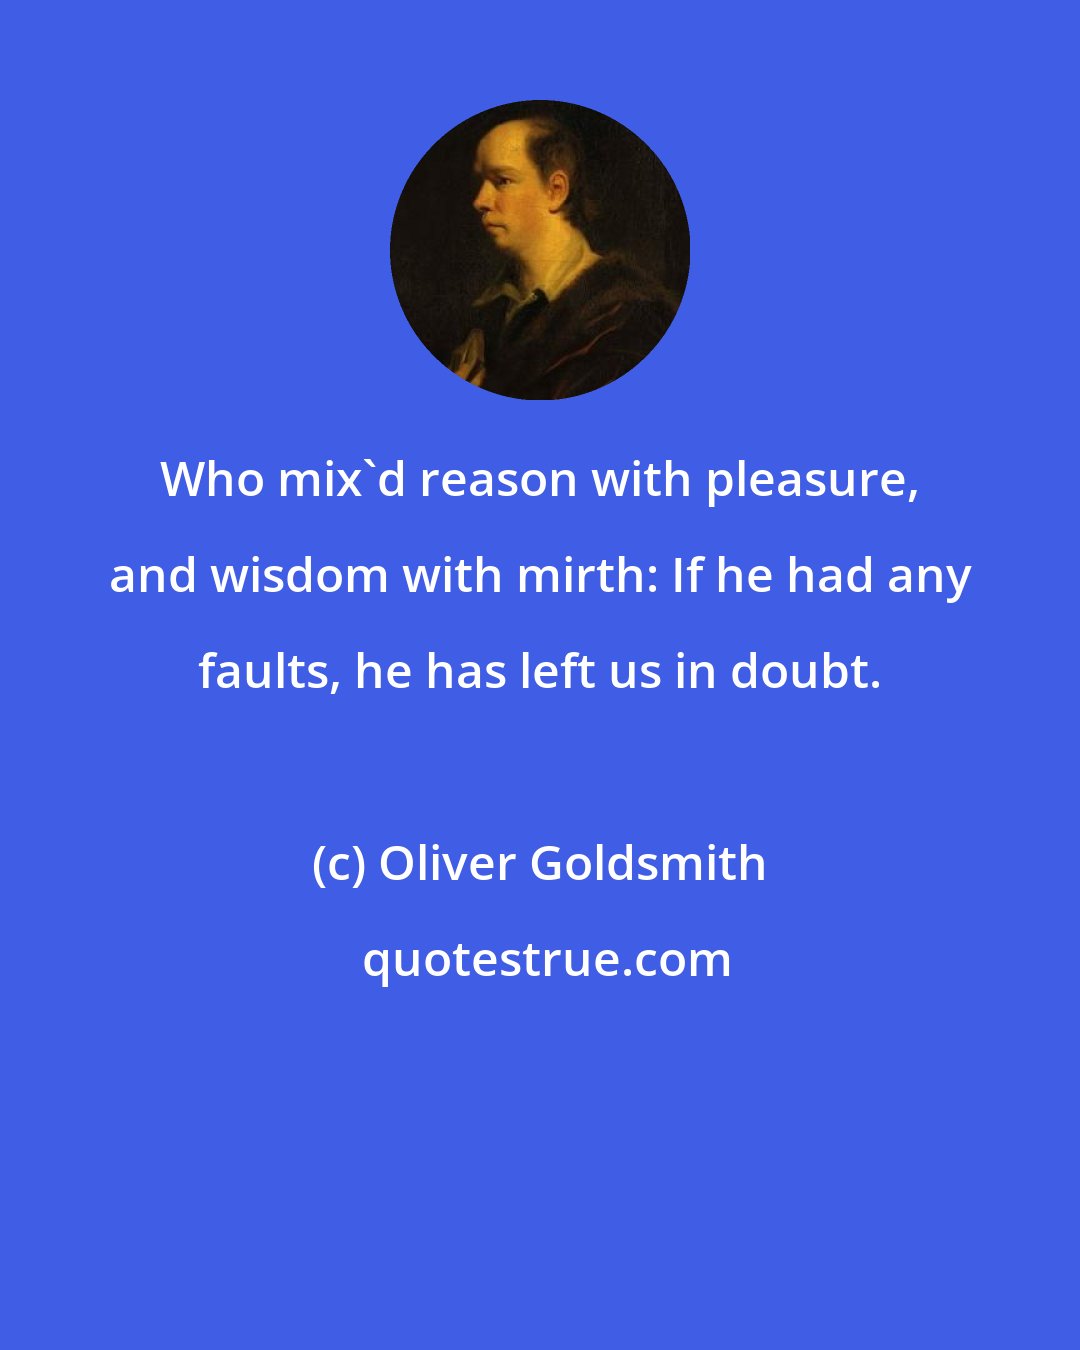 Oliver Goldsmith: Who mix'd reason with pleasure, and wisdom with mirth: If he had any faults, he has left us in doubt.